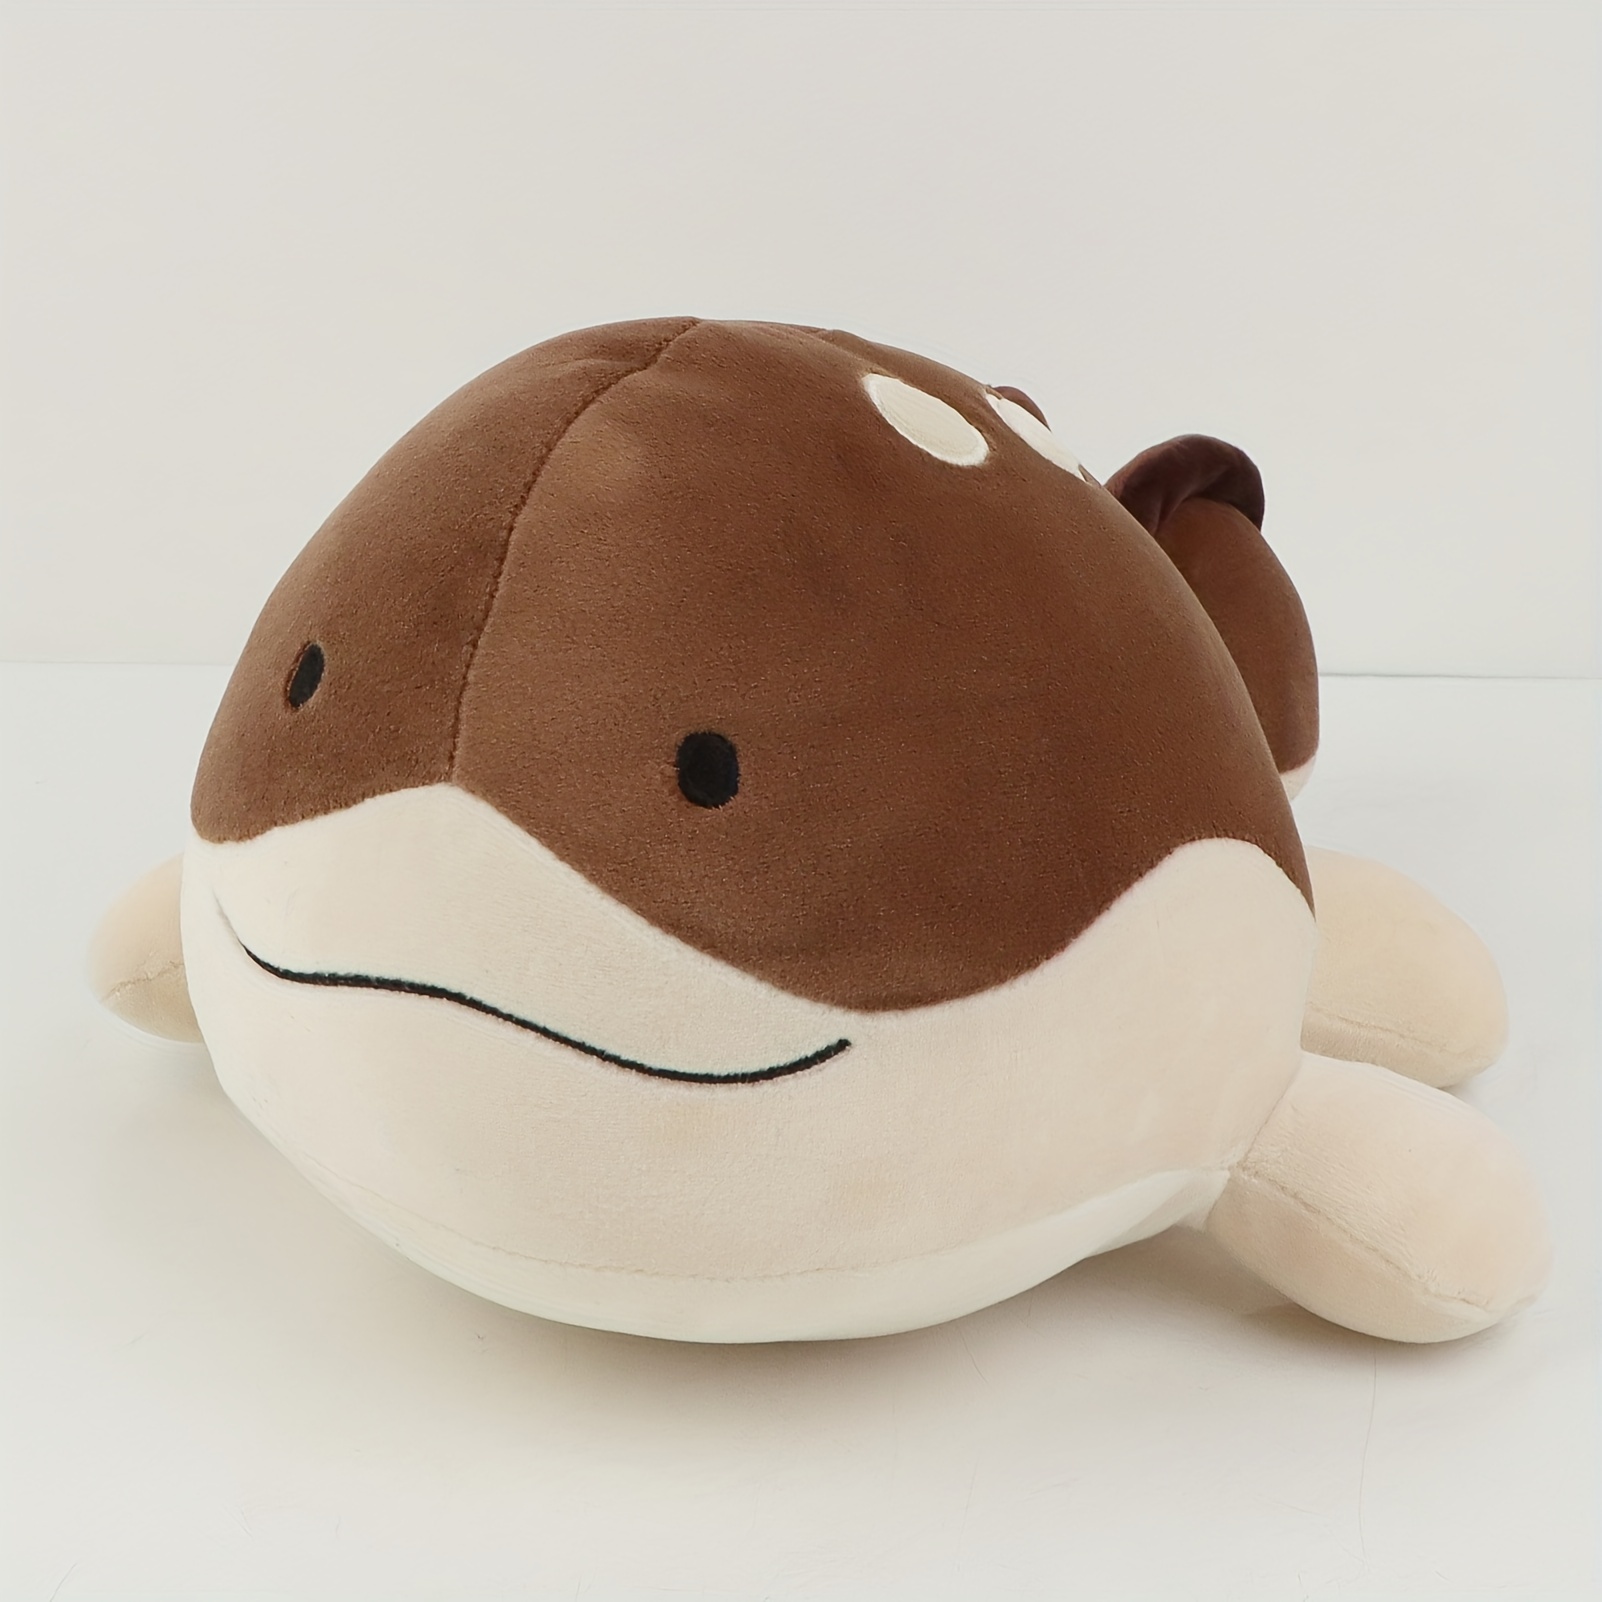 Top 20 Cute Anime Plushies: Buyer's Guide - Anime Plushies : r/plushies